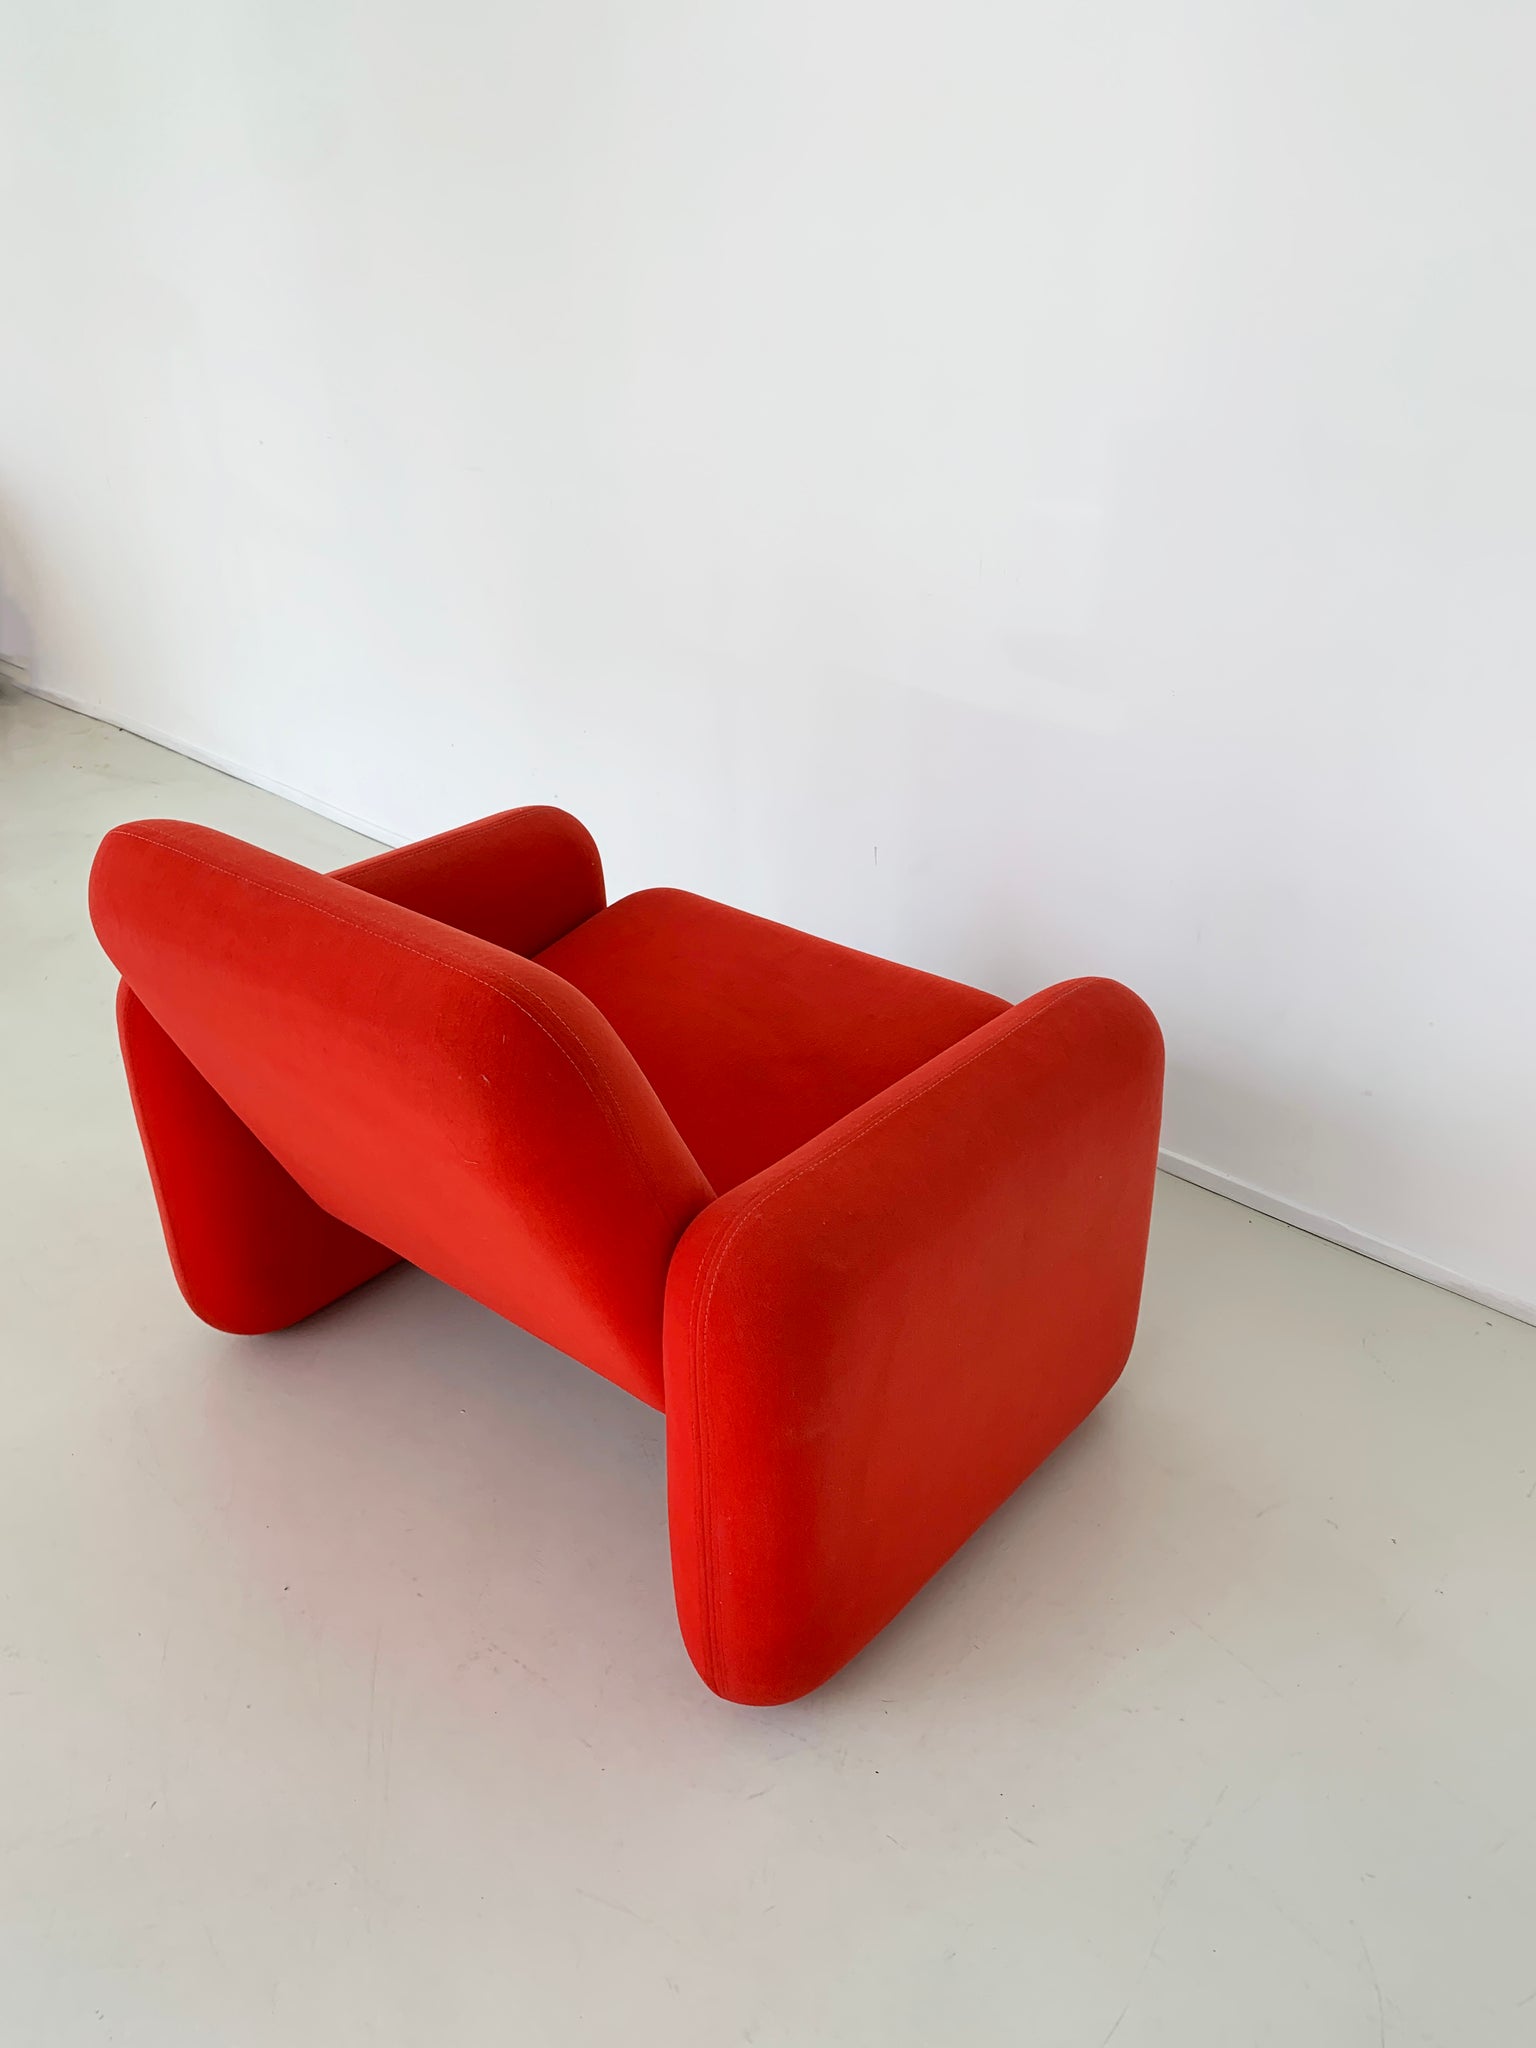 1970s Ray Wilkes Red Chiclet Club Chair for Herman Miller